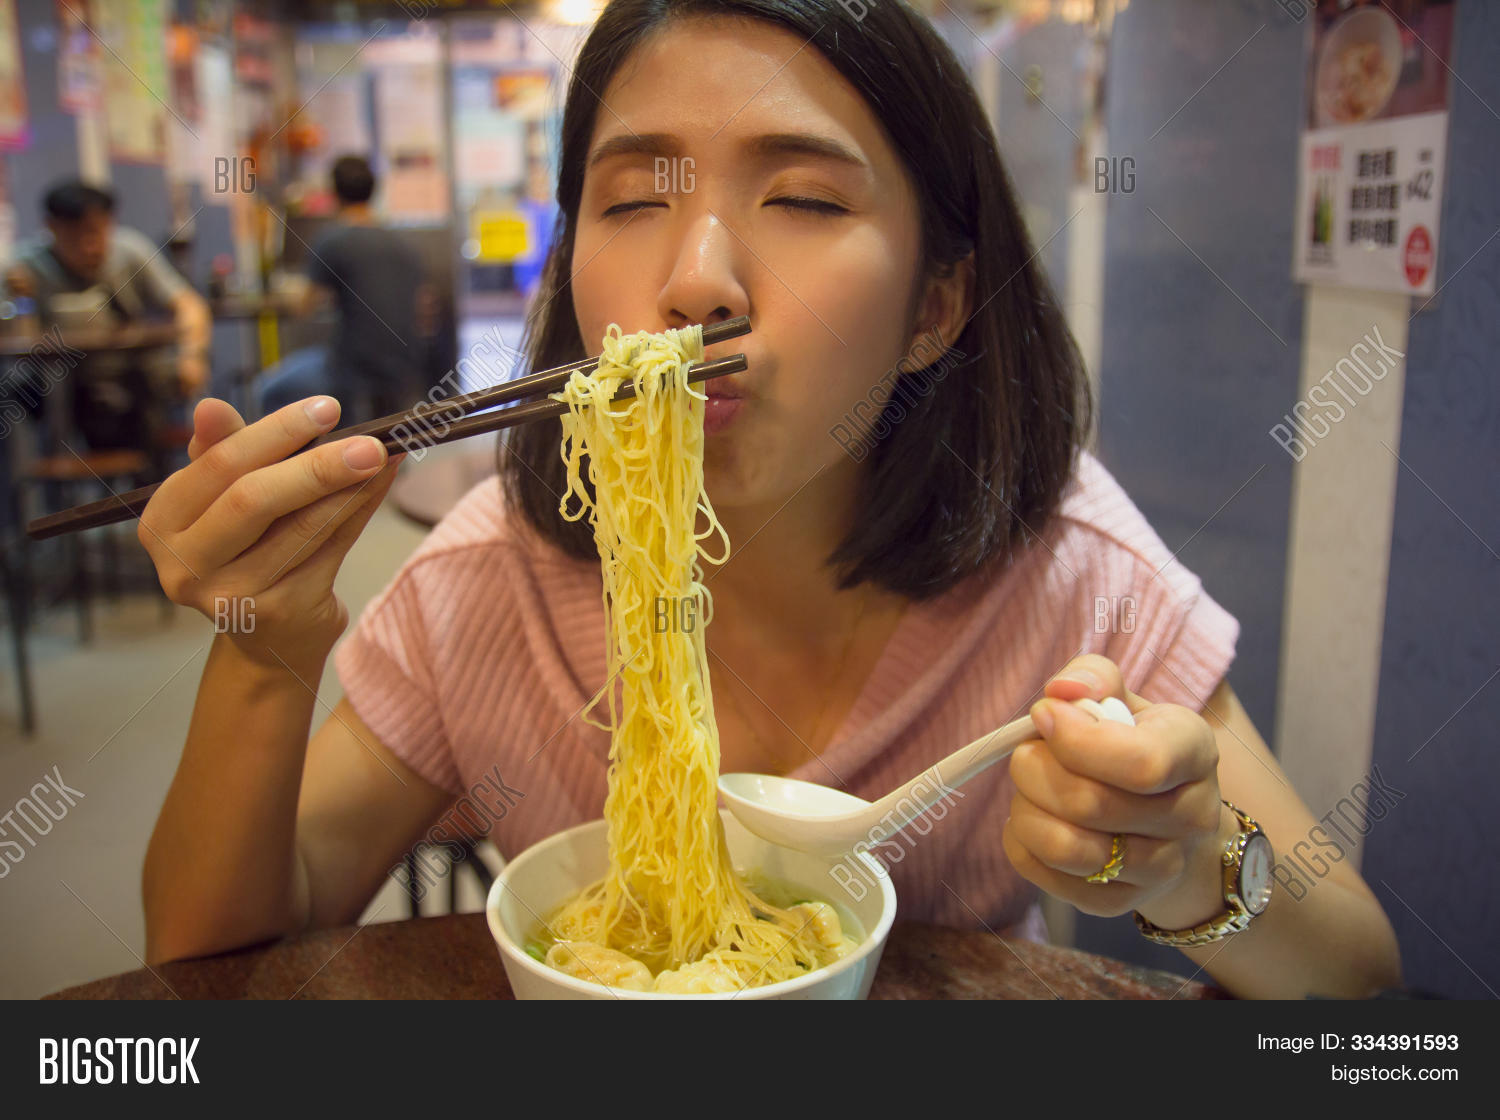 amrita mohan recommends japanese girl eating noodles pic